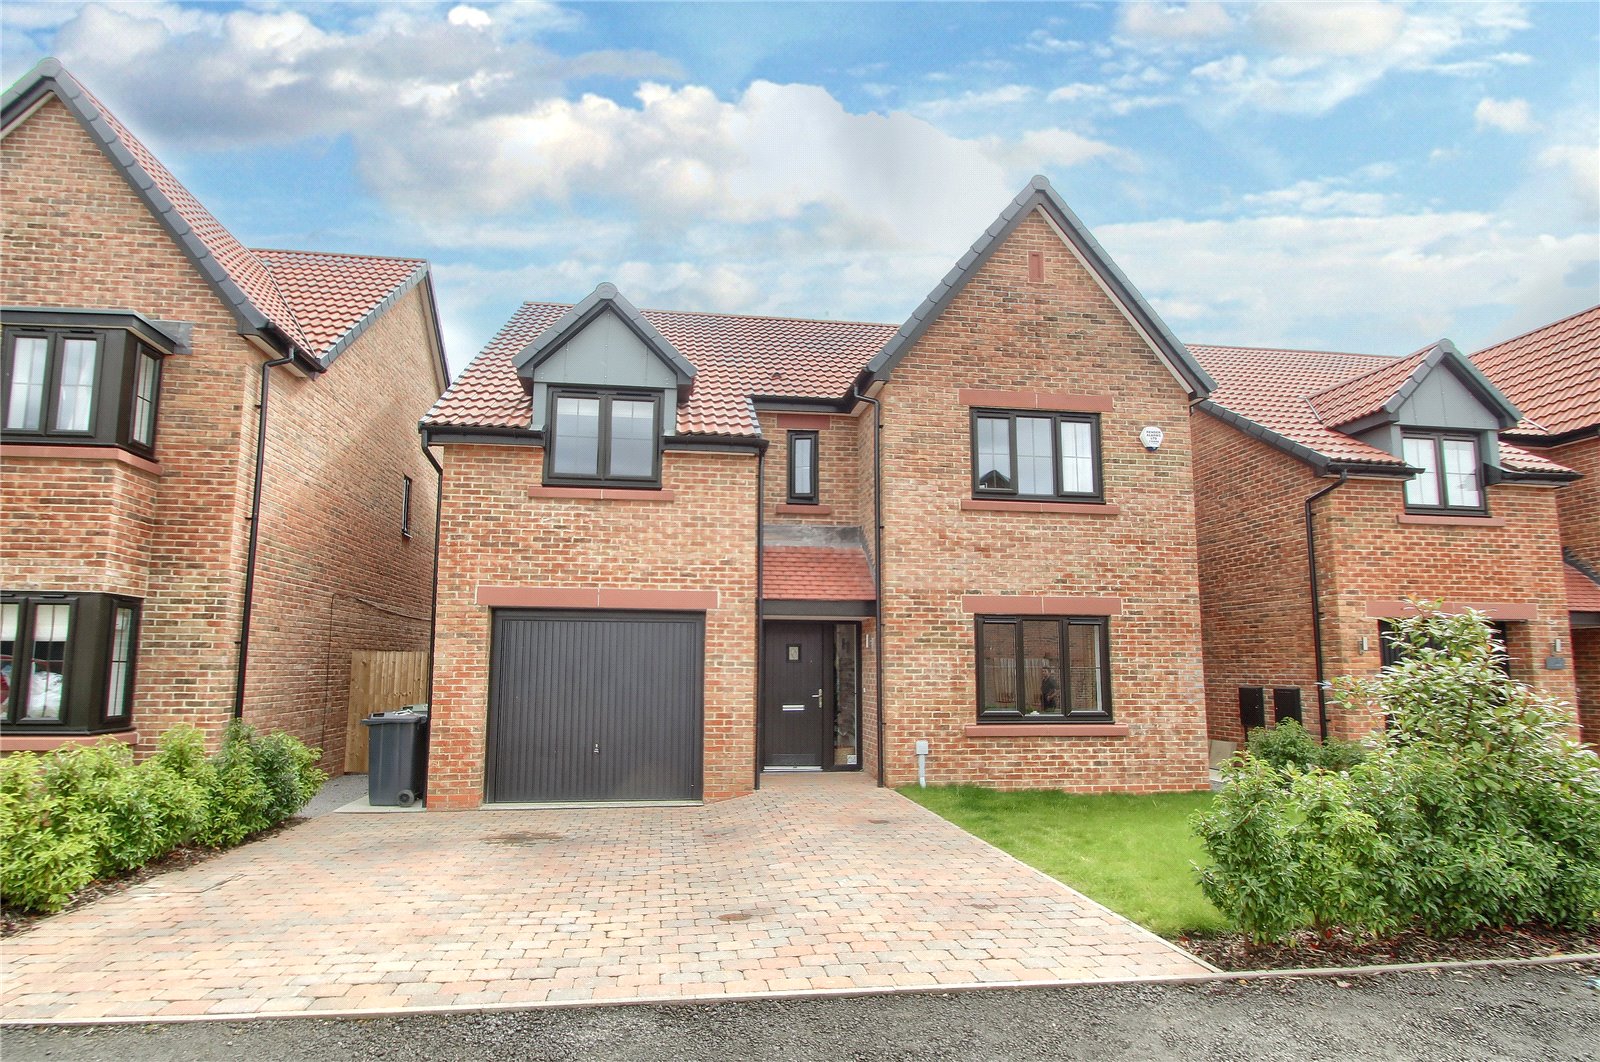 4 bed house for sale in Blackthorn Drive, Hurworth - Property Image 1